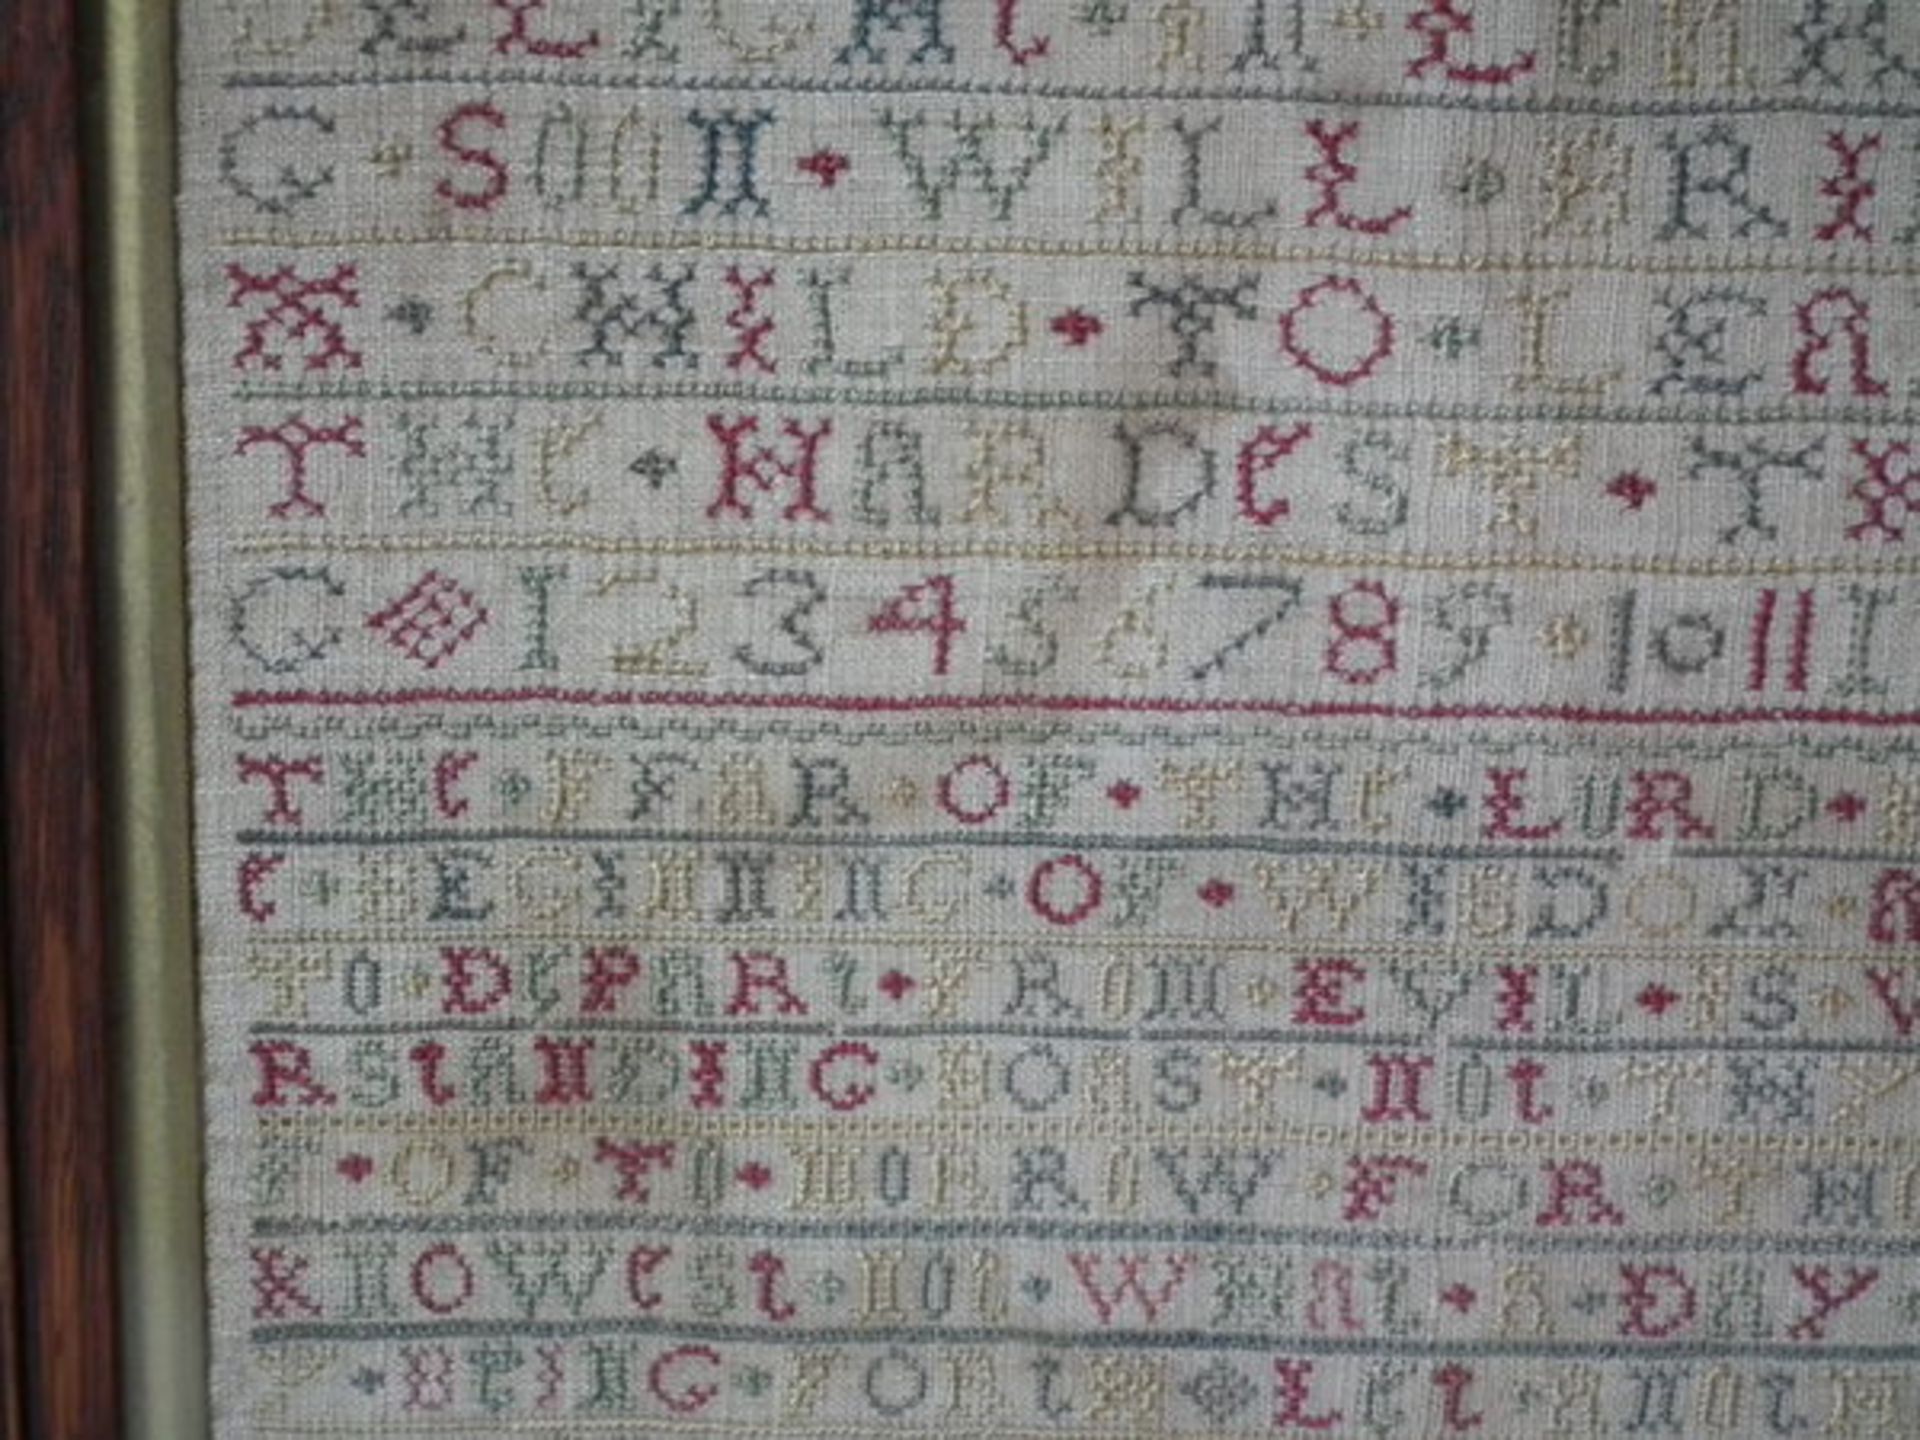 Needlework Band Sampler dated 1724 by Ann Wooding - FREE UK DELIVERY - Image 9 of 20